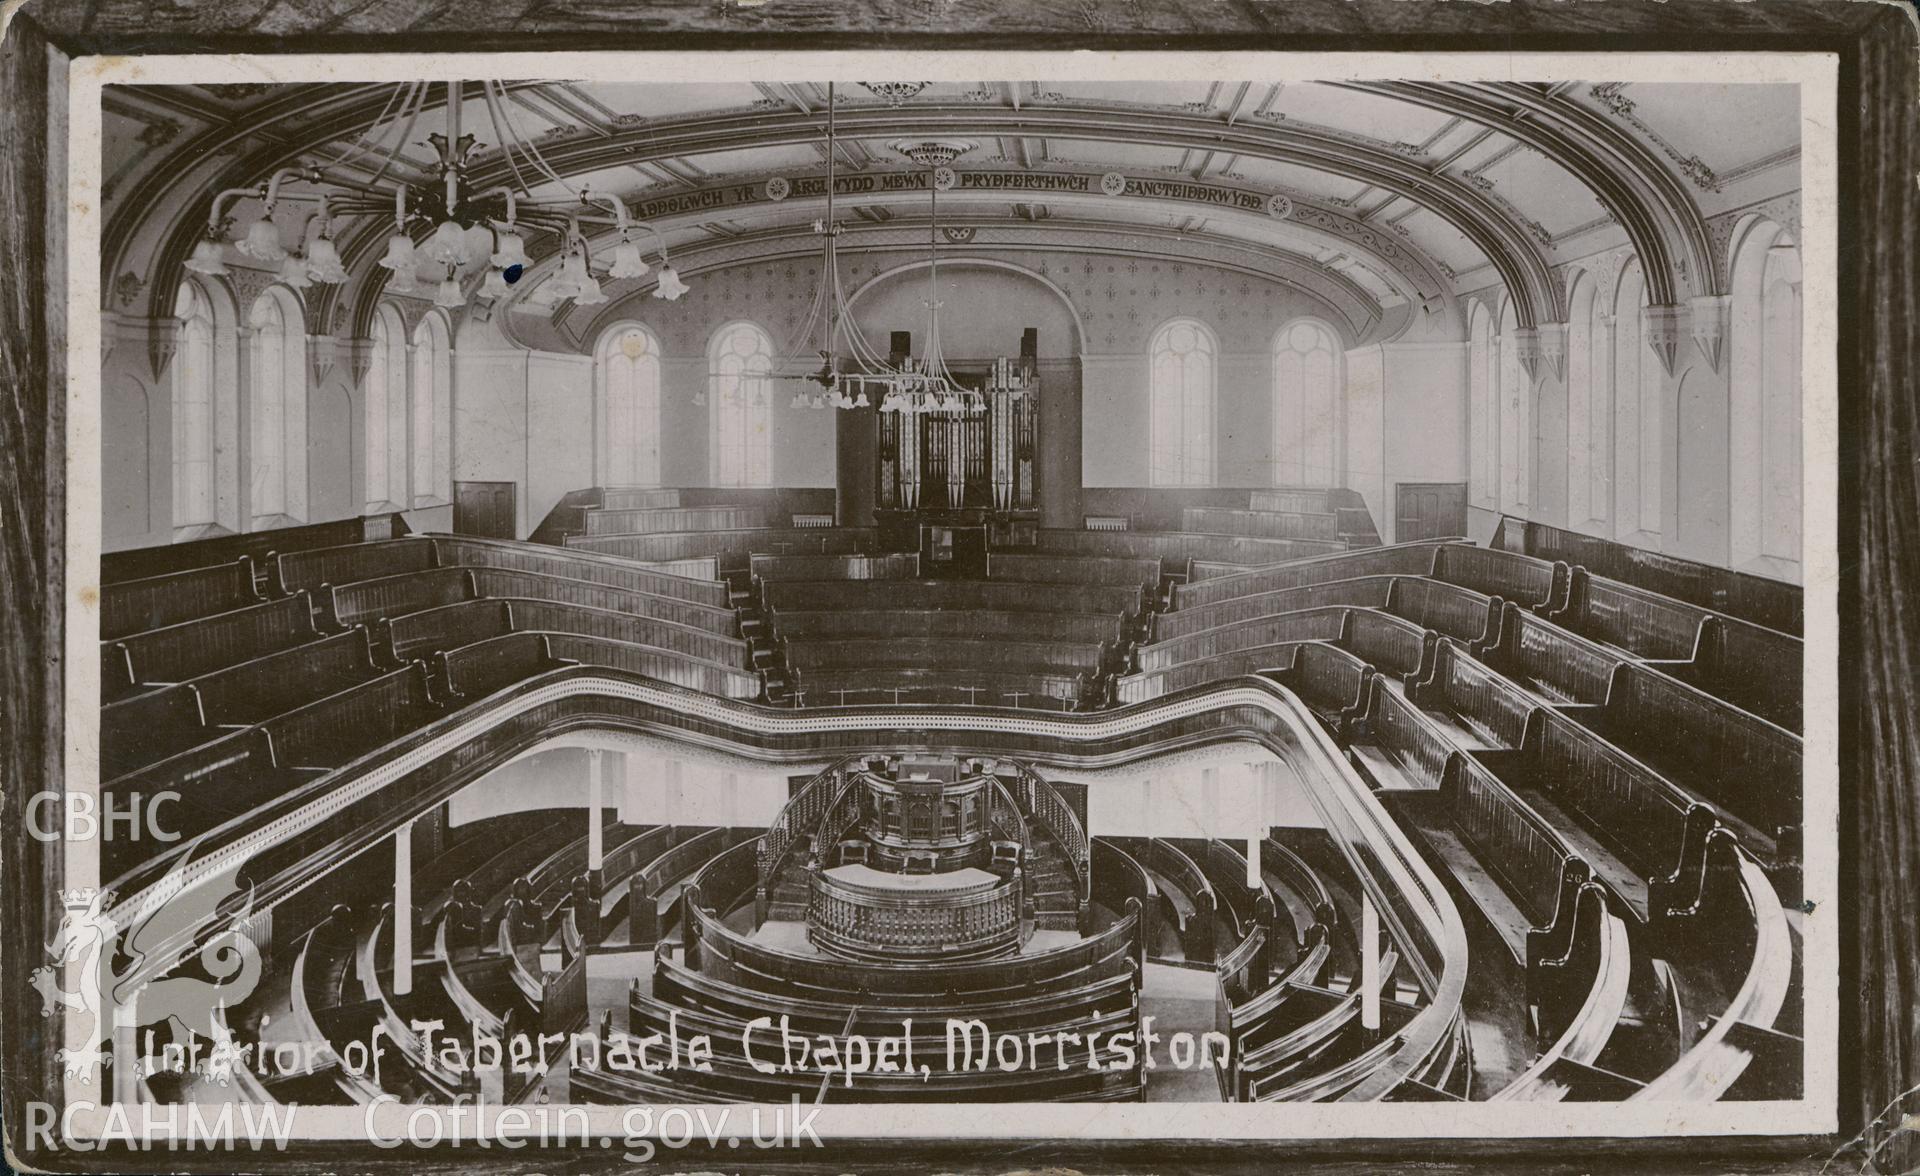 Digital copy of monochrome postcard showing view from rear 1st floor seating towards organ & pulpit at Tabernacle Welsh Independent chapel, Morriston. Produced by Rhys Roberts, Bookseller, Stationer & Printer, Morriston. Loaned for copying by Thomas Lloyd.